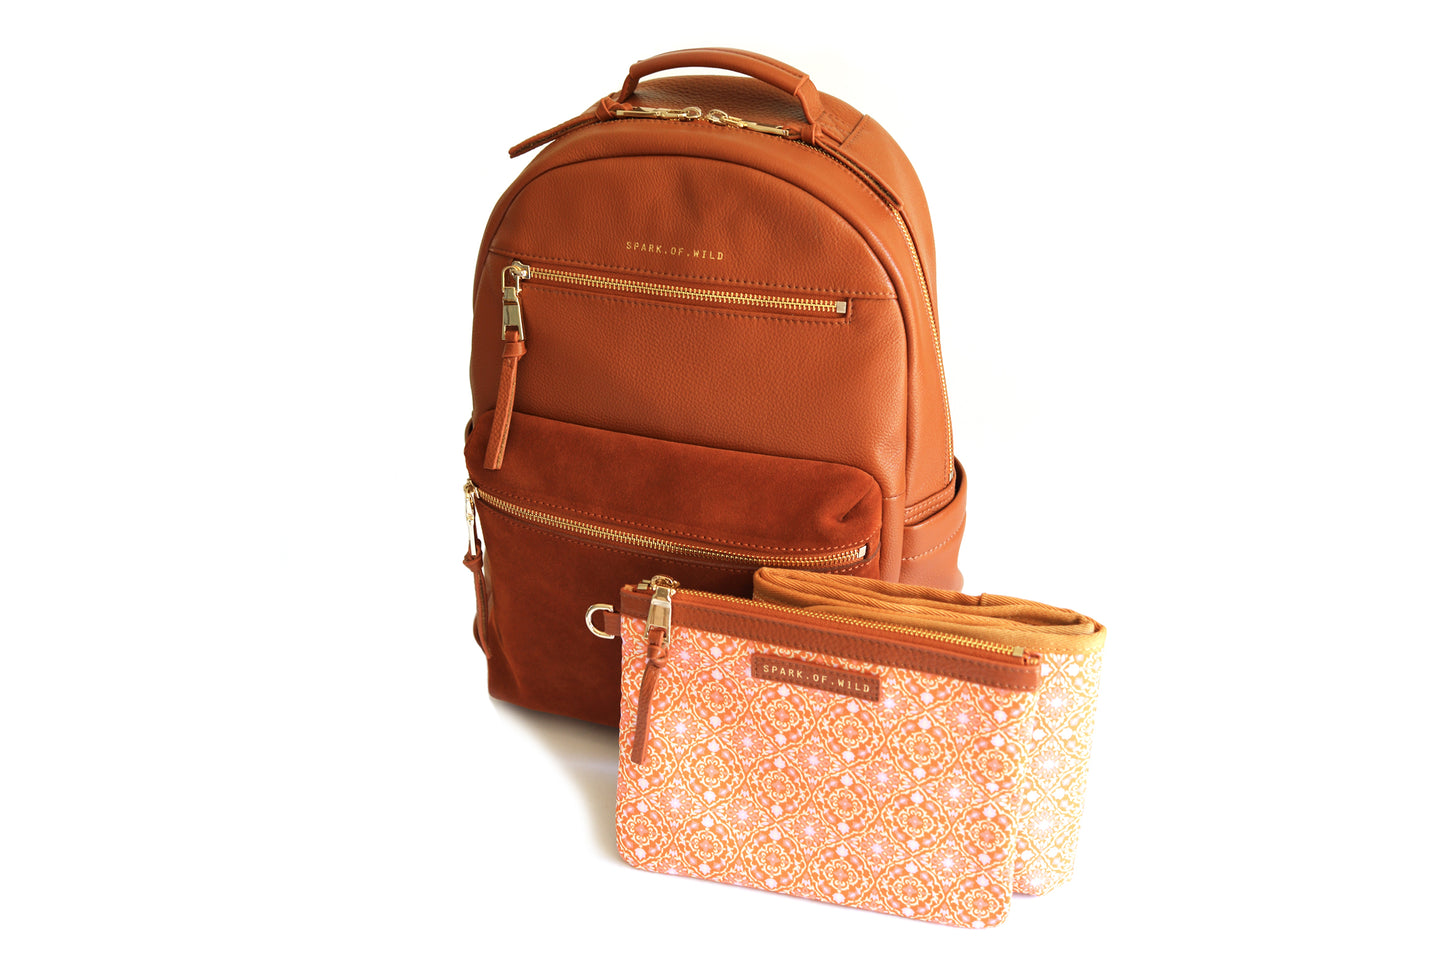 Willow Backpack - Tan